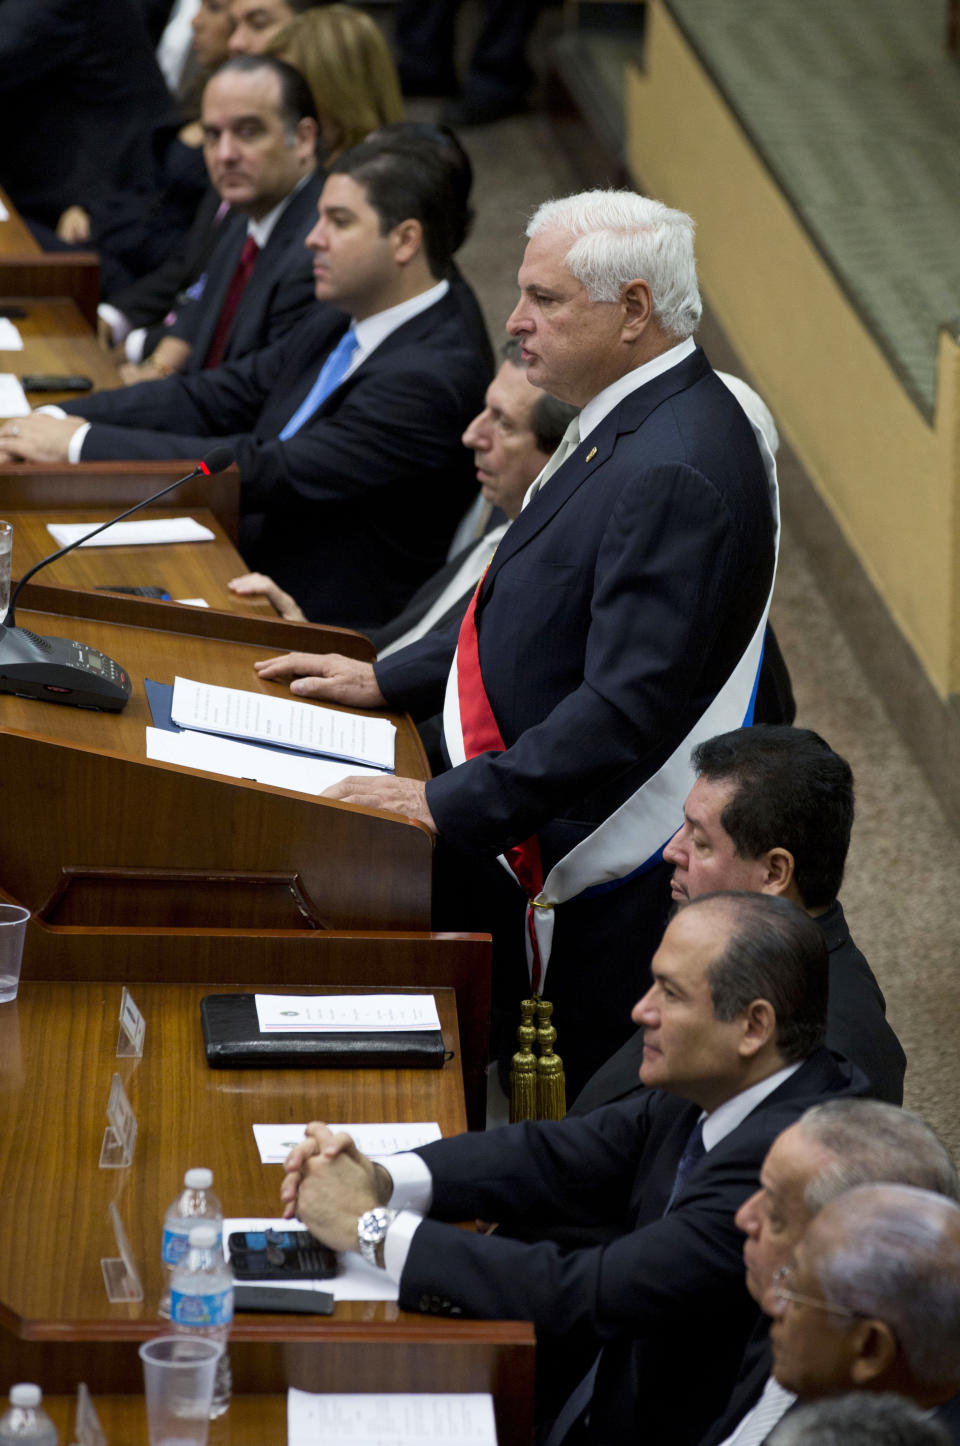 Panama's President Ricardo Martinelli delivers the last state-of-the nation address of his term to Congress in Panama City, Thursday, Jan. 2, 2014. Panama will hold their next presidential election this year in May. (AP Photo/Arnulfo Franco)